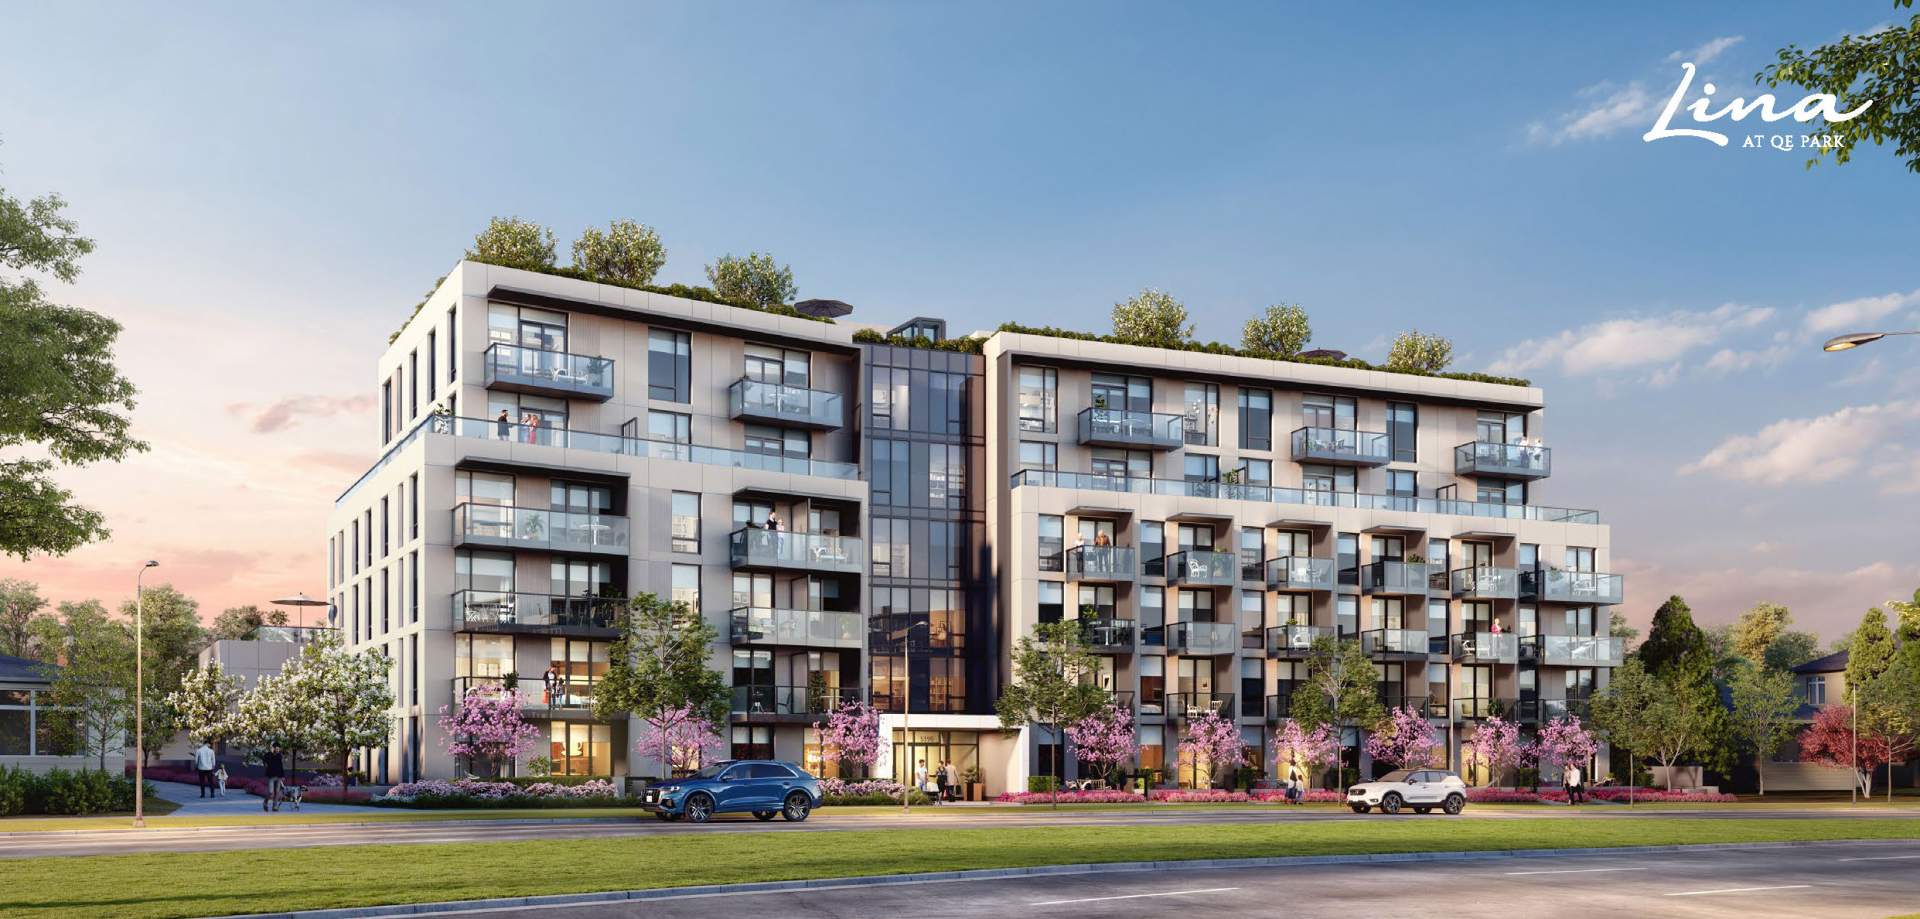 Lina at QE Park by Everbright – Availability, Plans, Prices